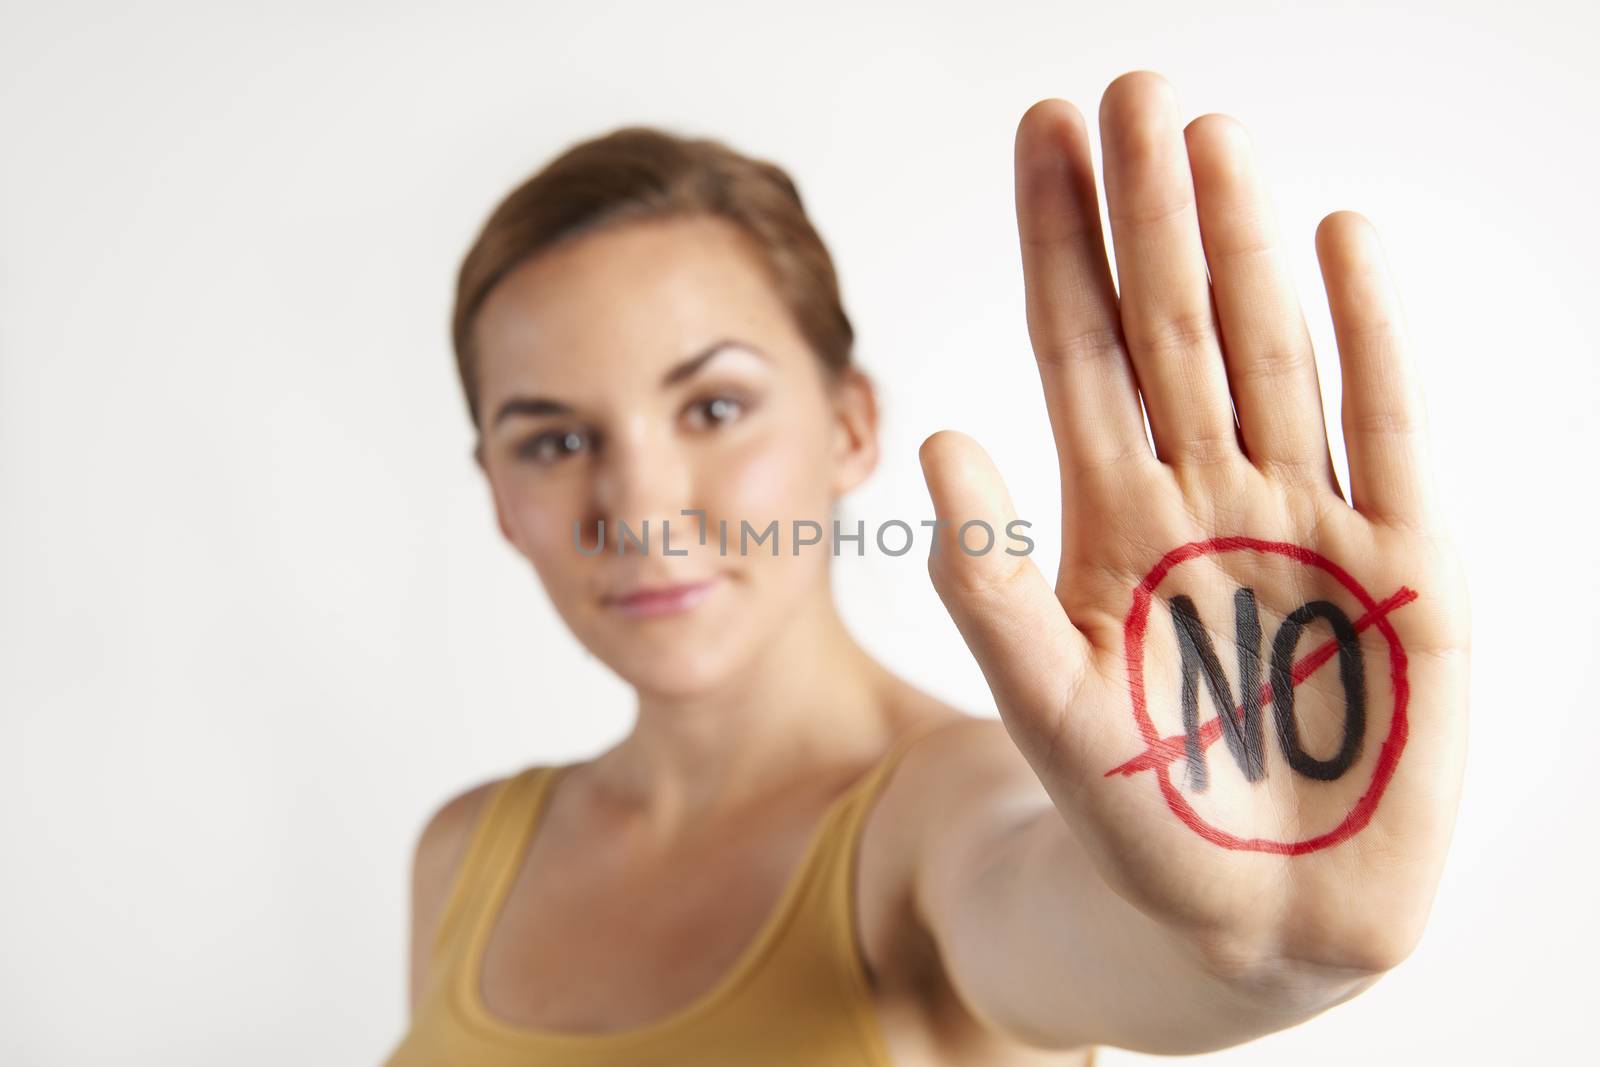 Female Protestor With "No" Written On Palm